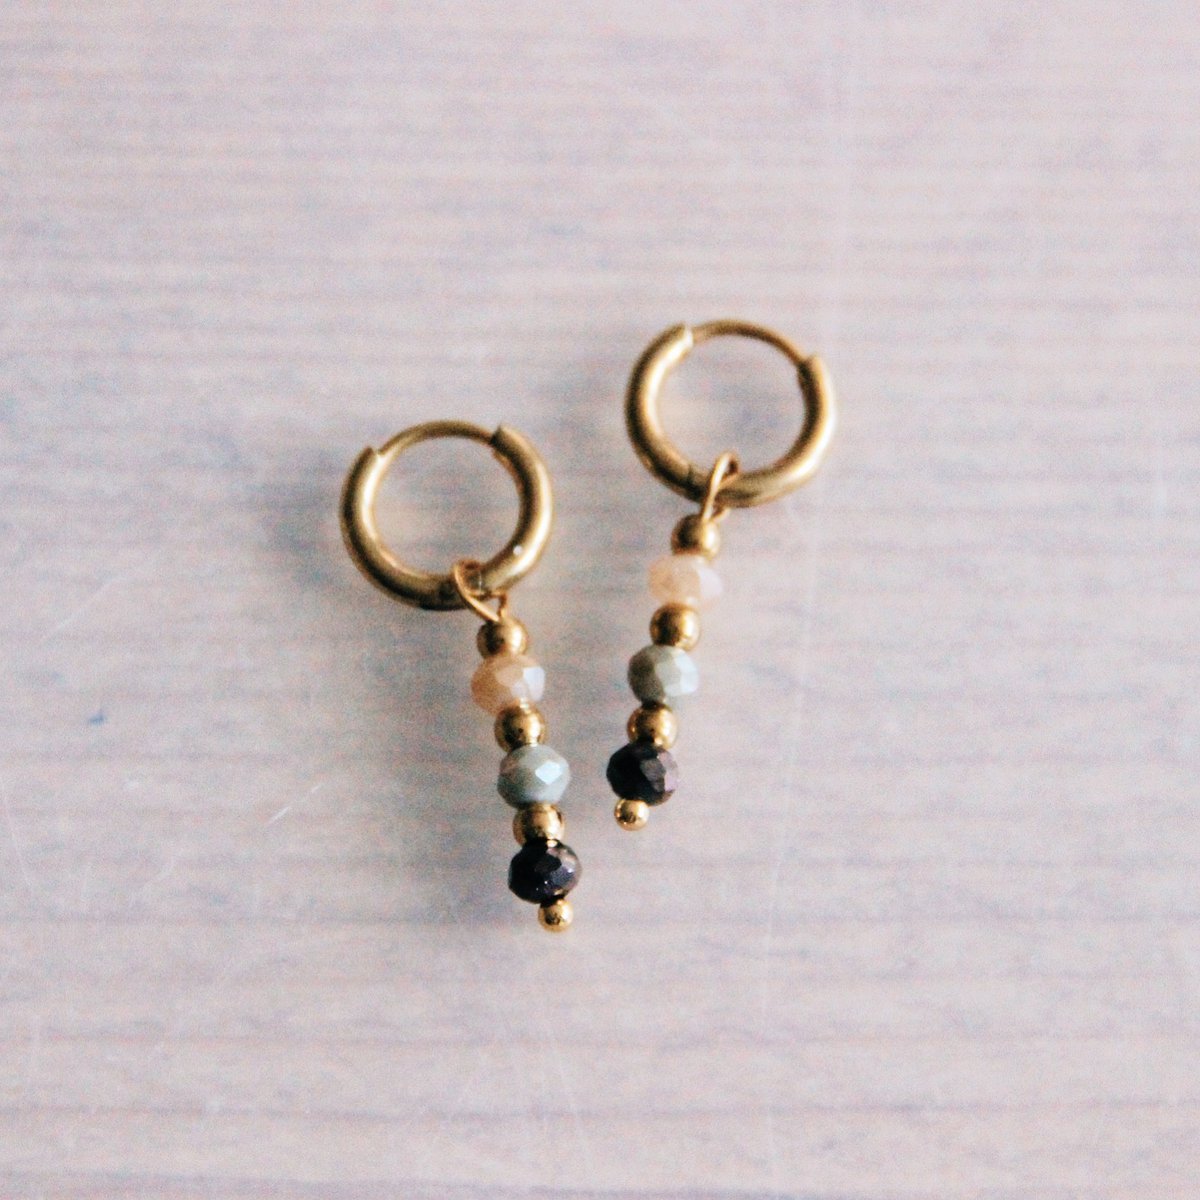 CB343: Stainless steel hoop earrings with facets - taupe